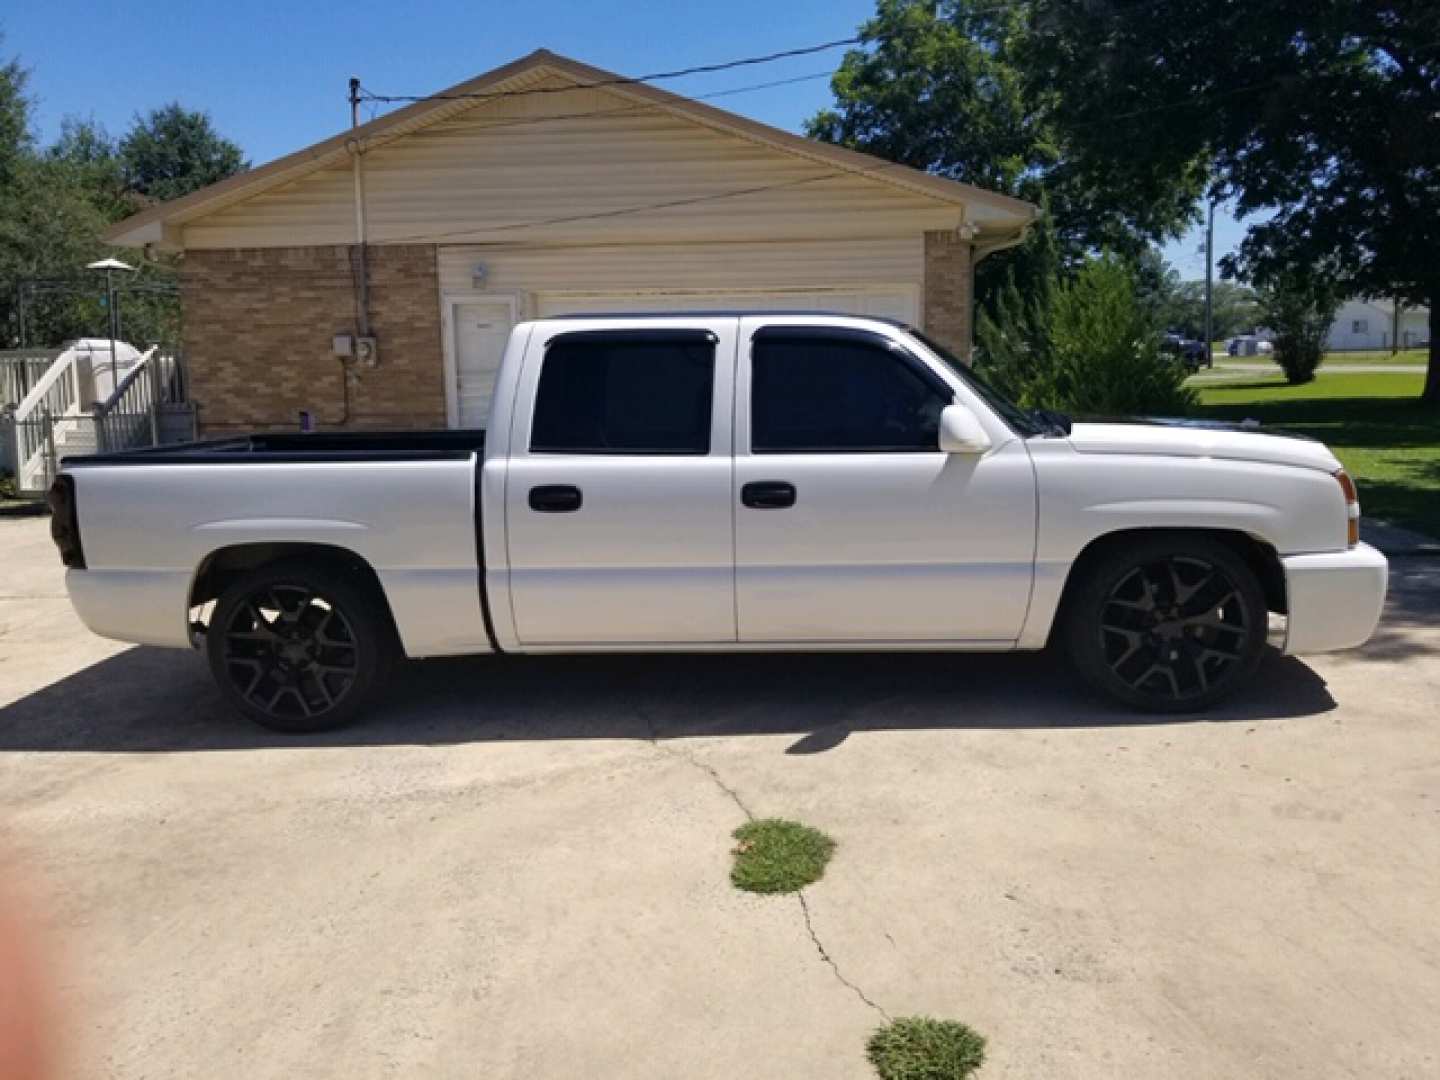 3rd Image of a 2005 CHEVROLET 1500